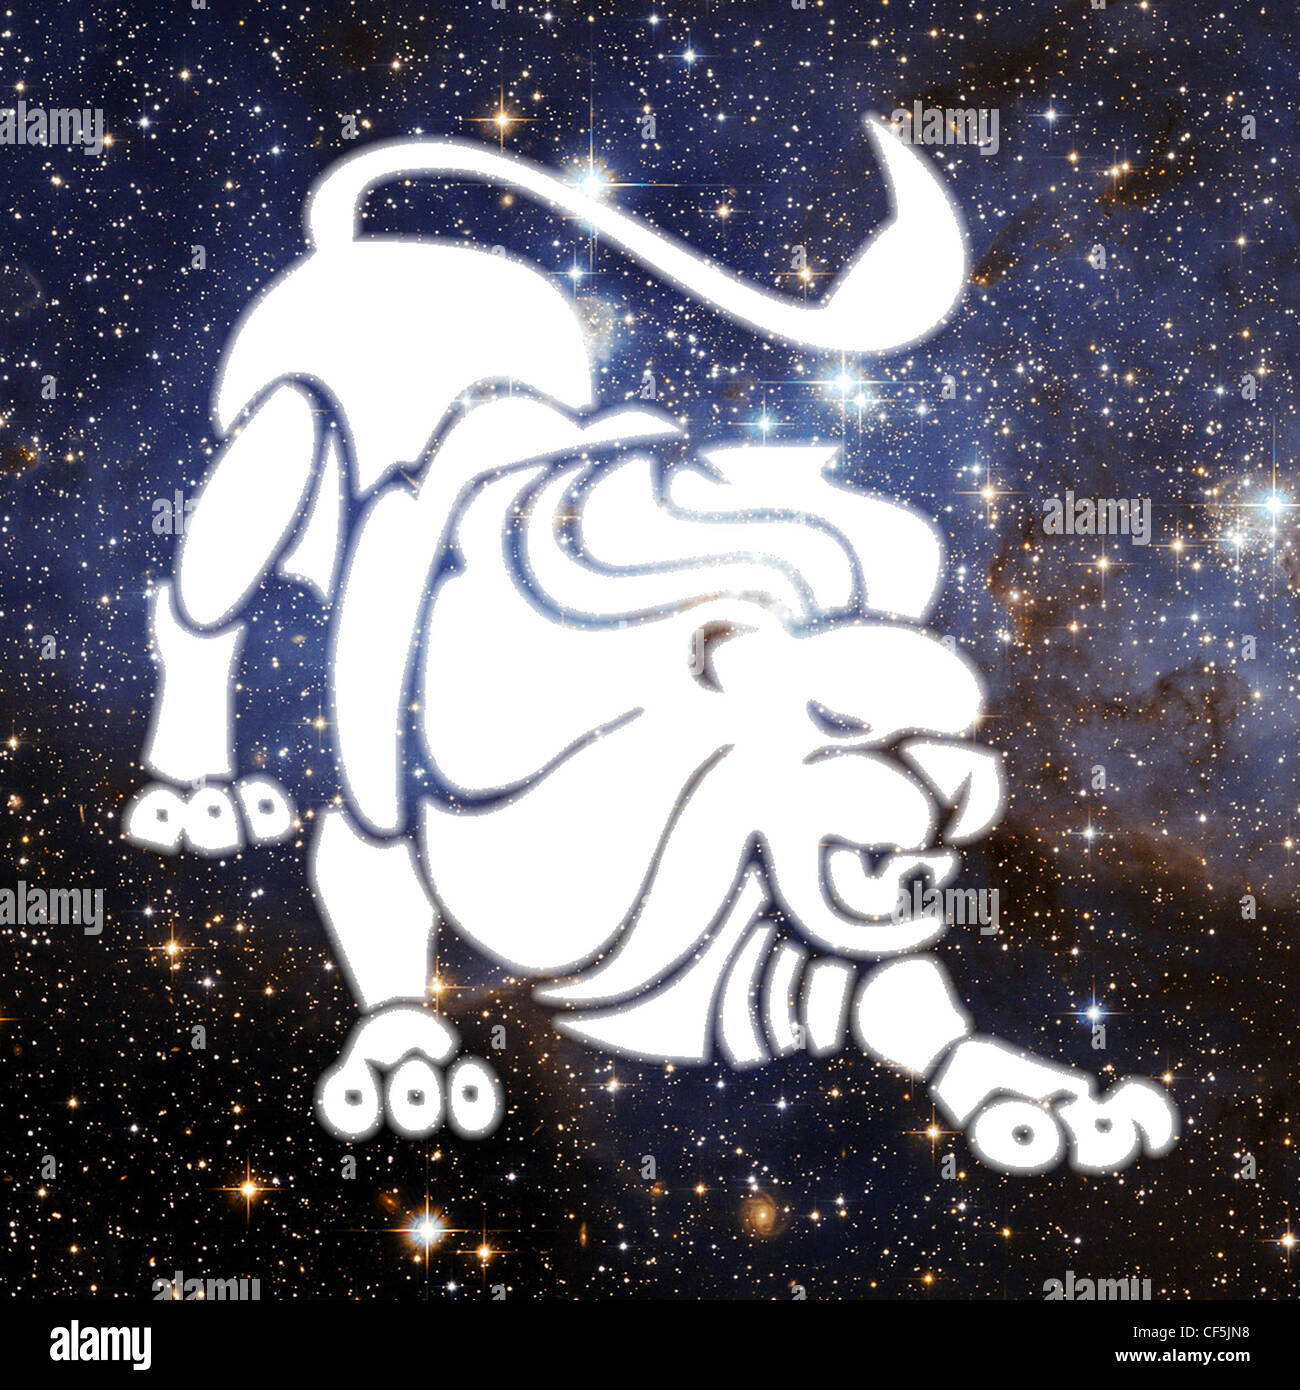 An illustration of a white silhouetted lion ready to pounce, set against a background of space filled with stars Stock Photo